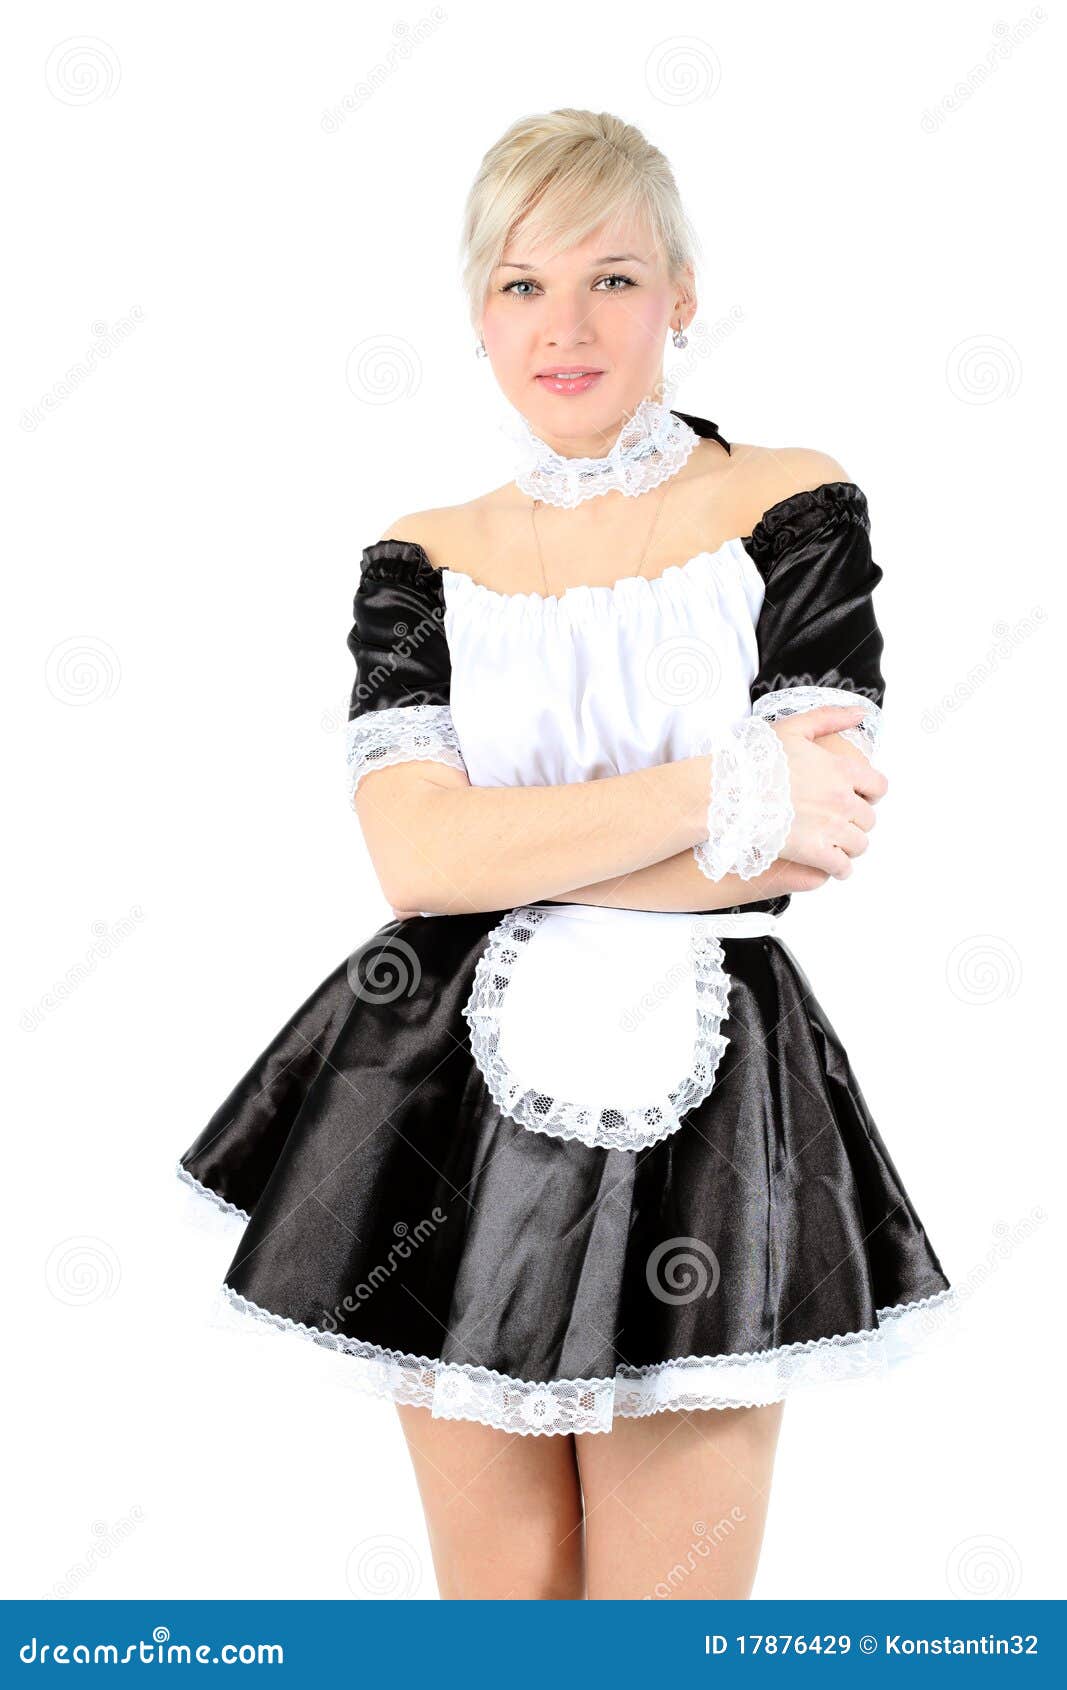 French Maid Royalty Free Stock Images - Image: 17876429